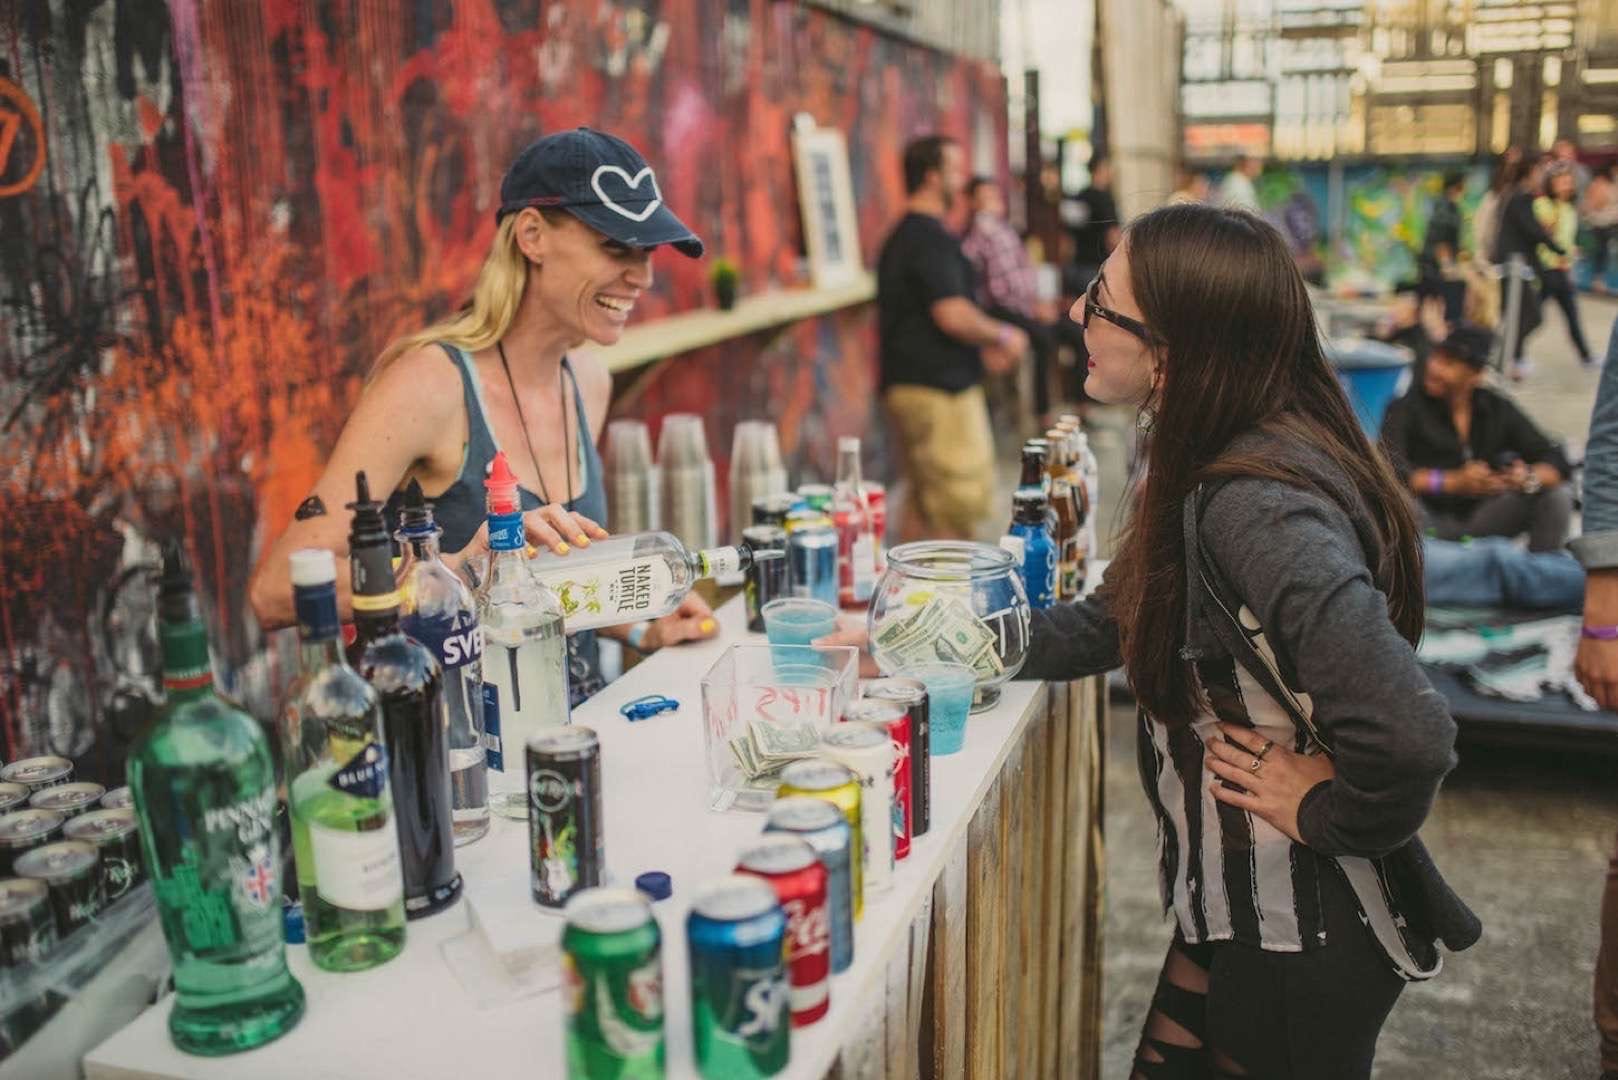 For the Love Music Festival-Smiling bartender serving a drink to a customer at a bar with lots of alcoholic and non-alcoholic drinks on the table